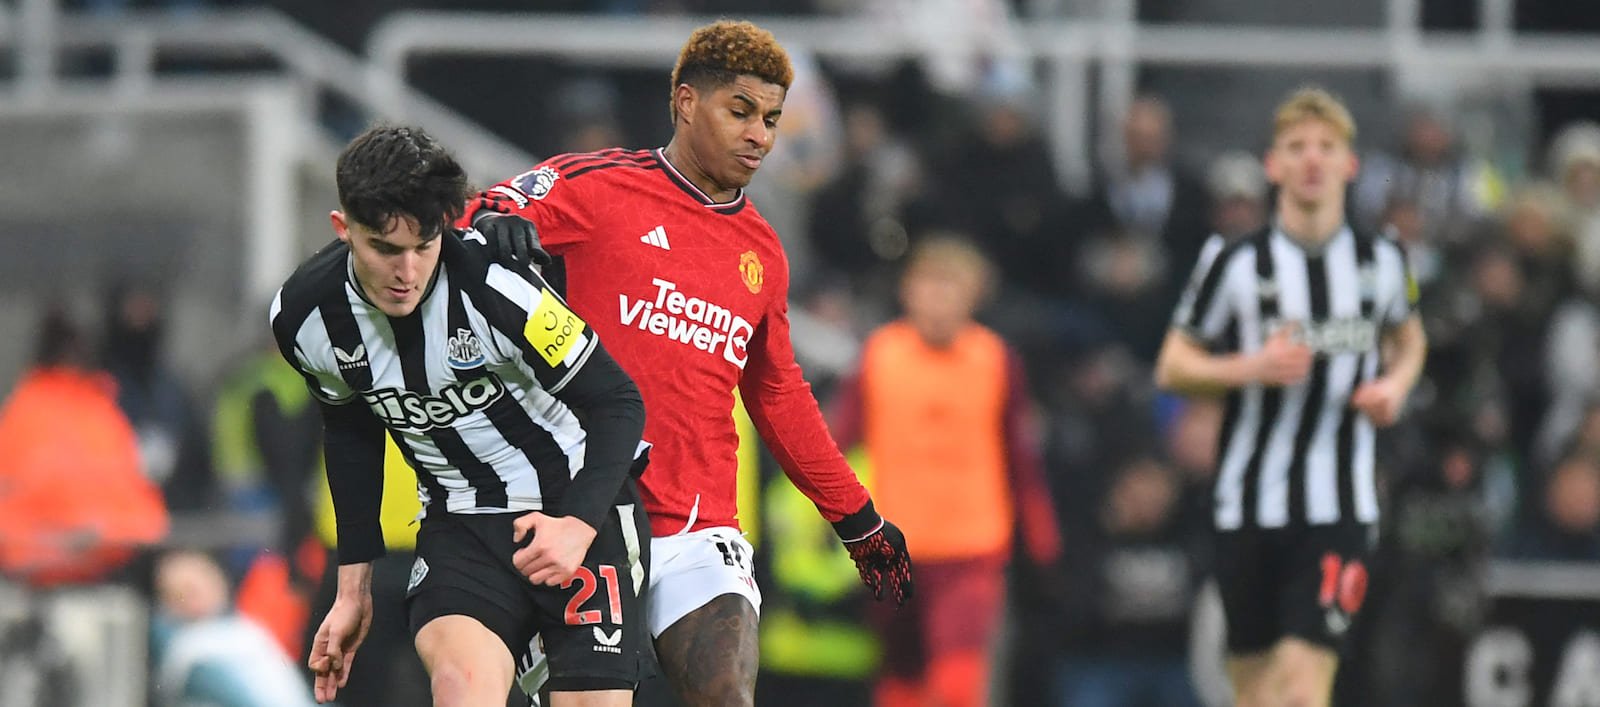 Ally McCoist and Jermaine Jenas appalled at Man United’s performance vs Newcastle United – Man United News And Transfer News